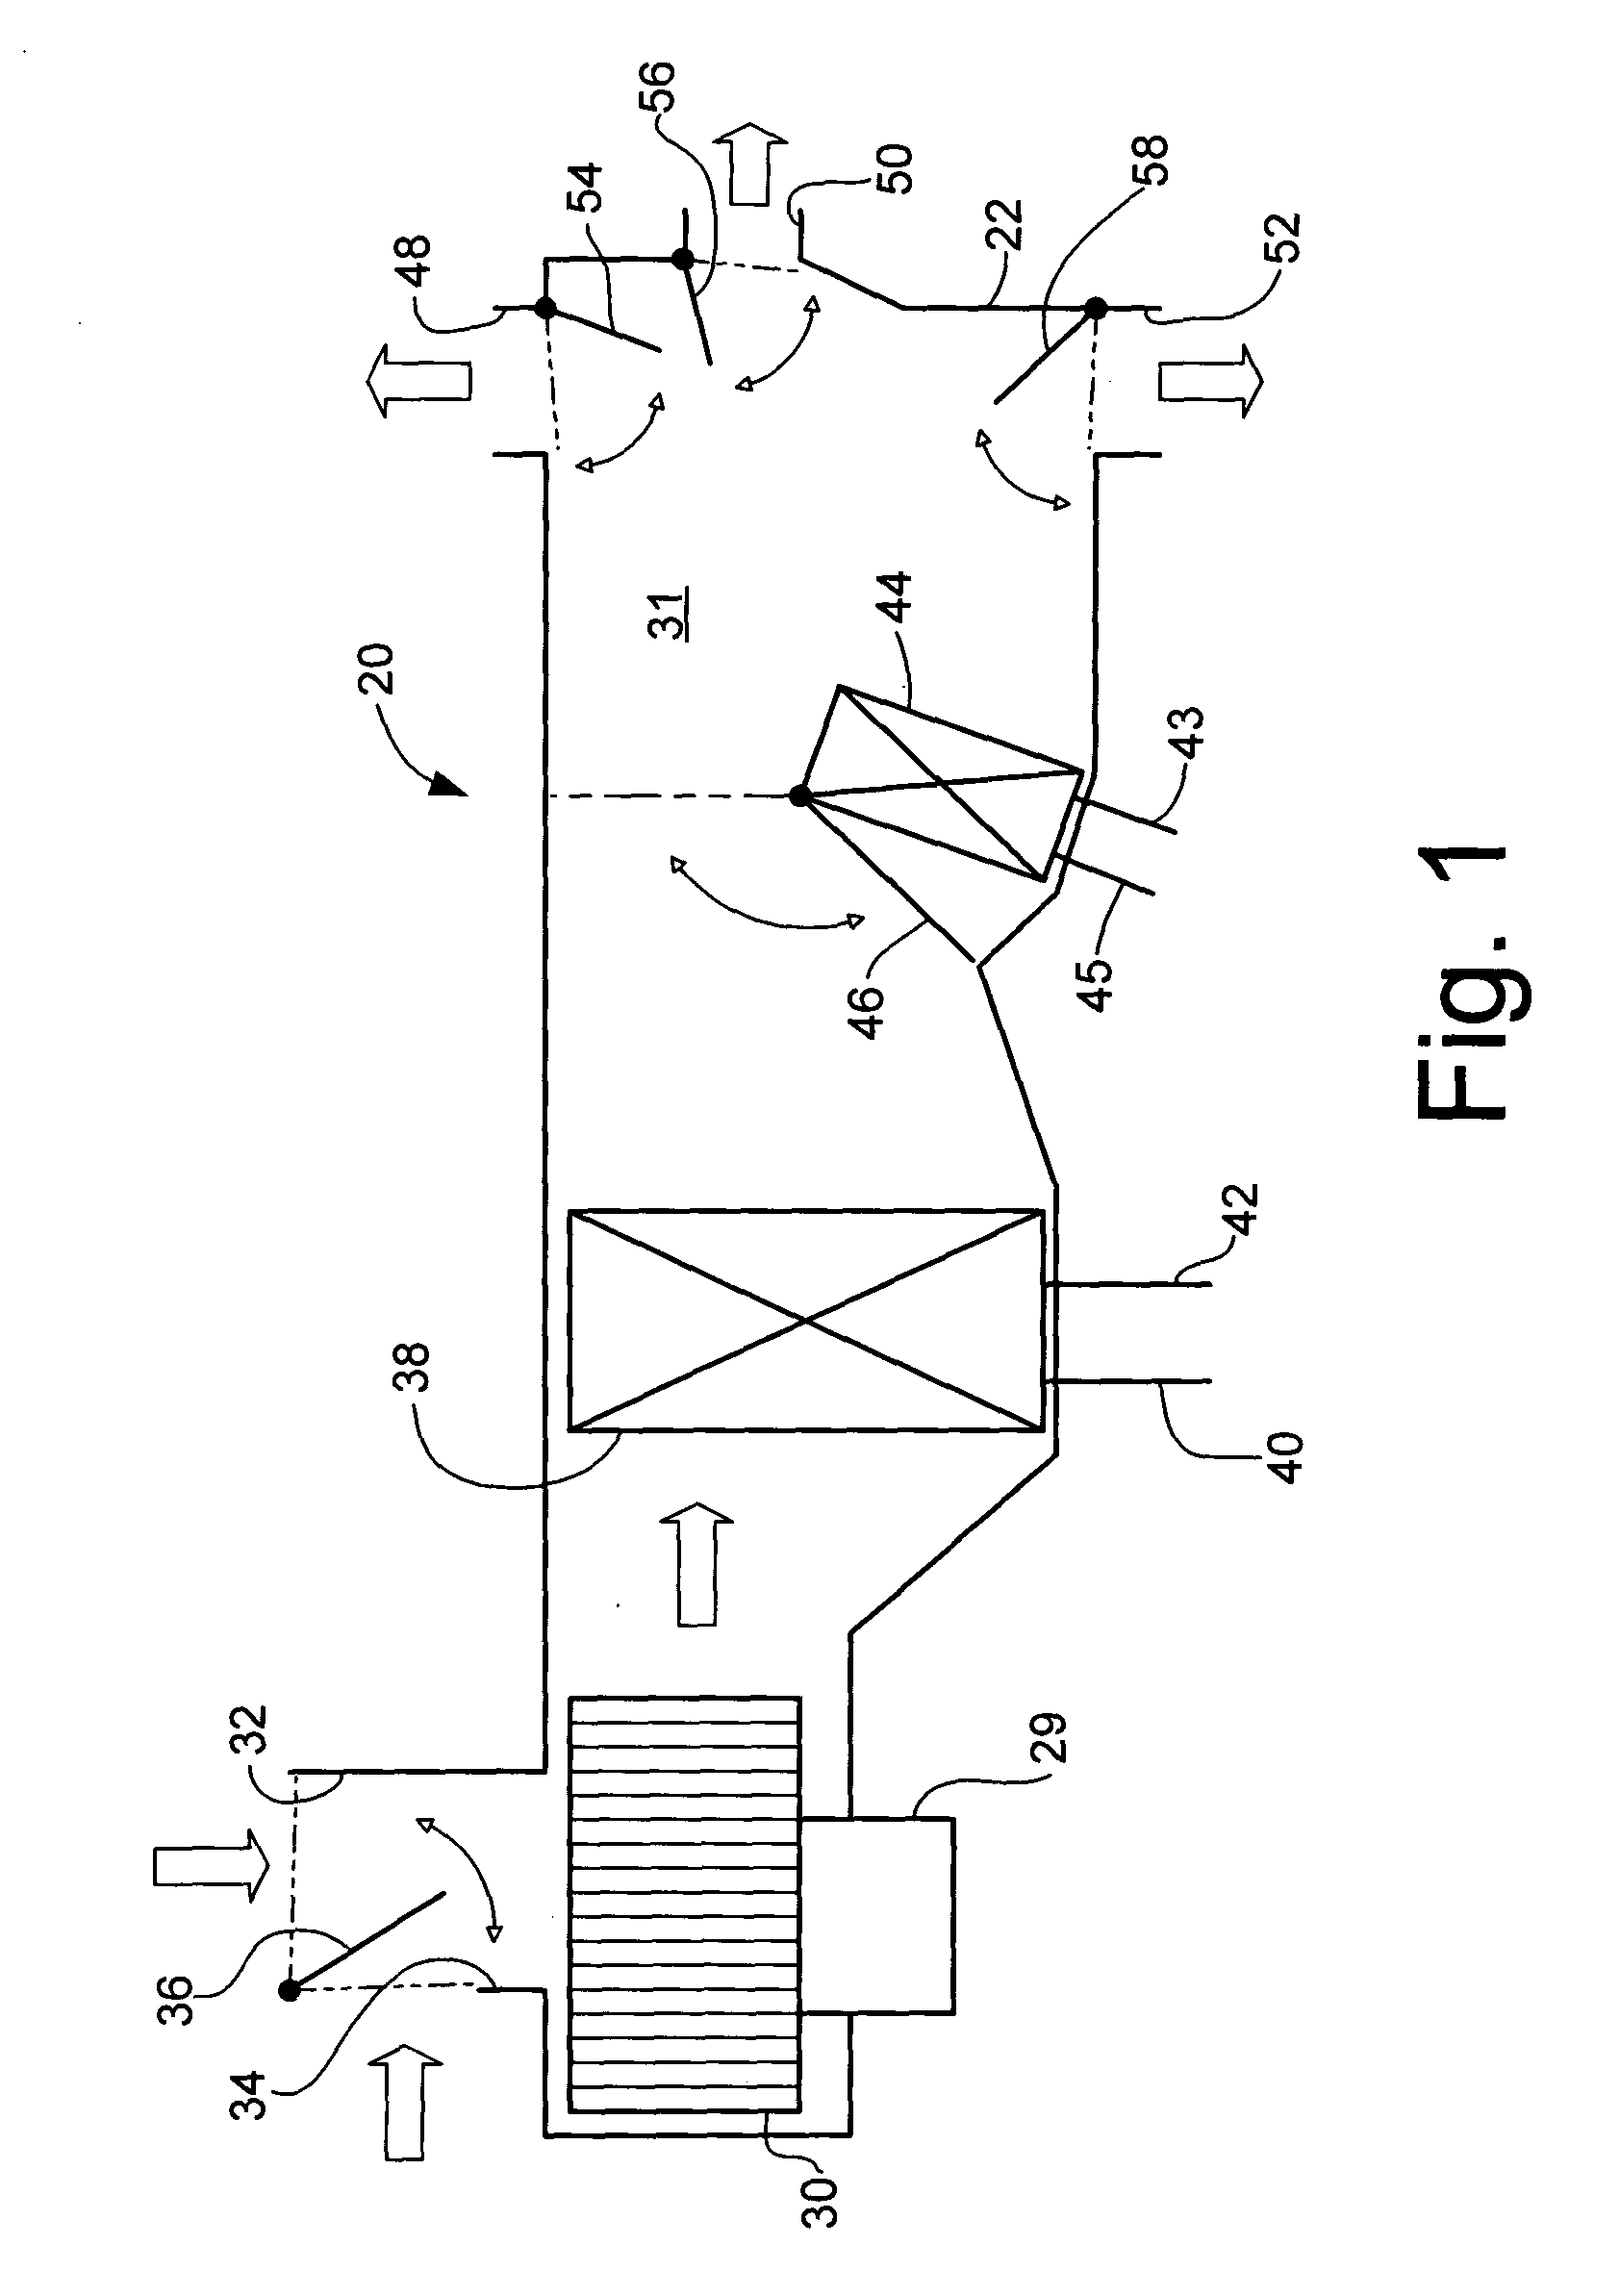 Heat pump and air conditioning systemn for a vehicle